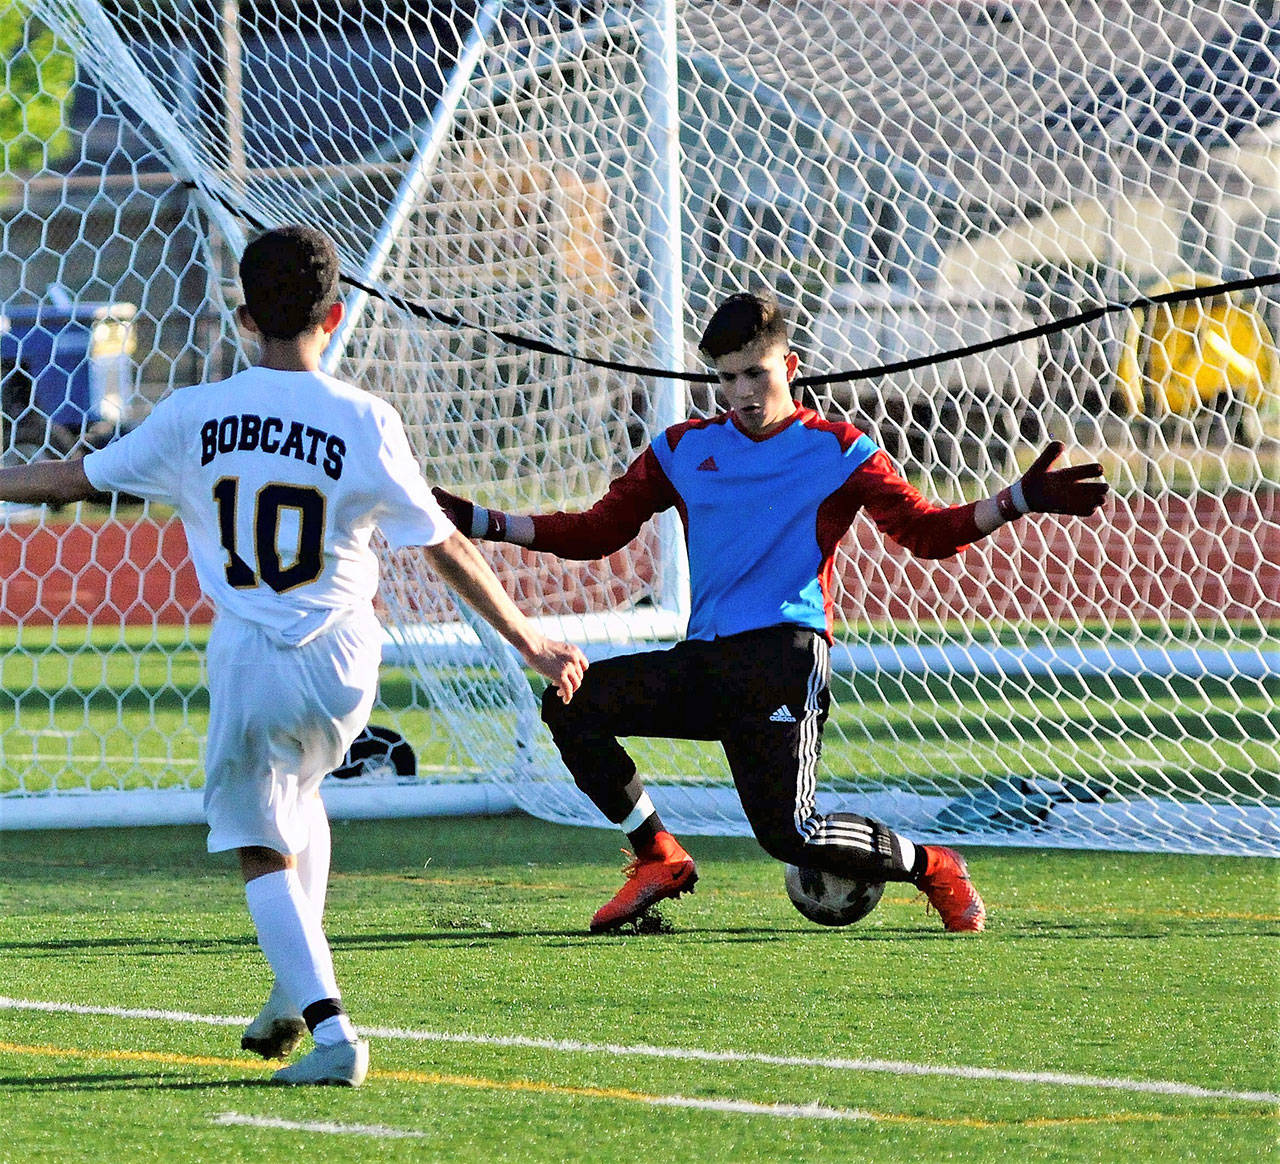 Aberdeen’s Antonio Torres (10) gets his shot between the legs of Centralia keeper Jacob Fink to score a goal in the 11th minute on Thursday. (Hasani Grayson | Grays Harbor News Group)